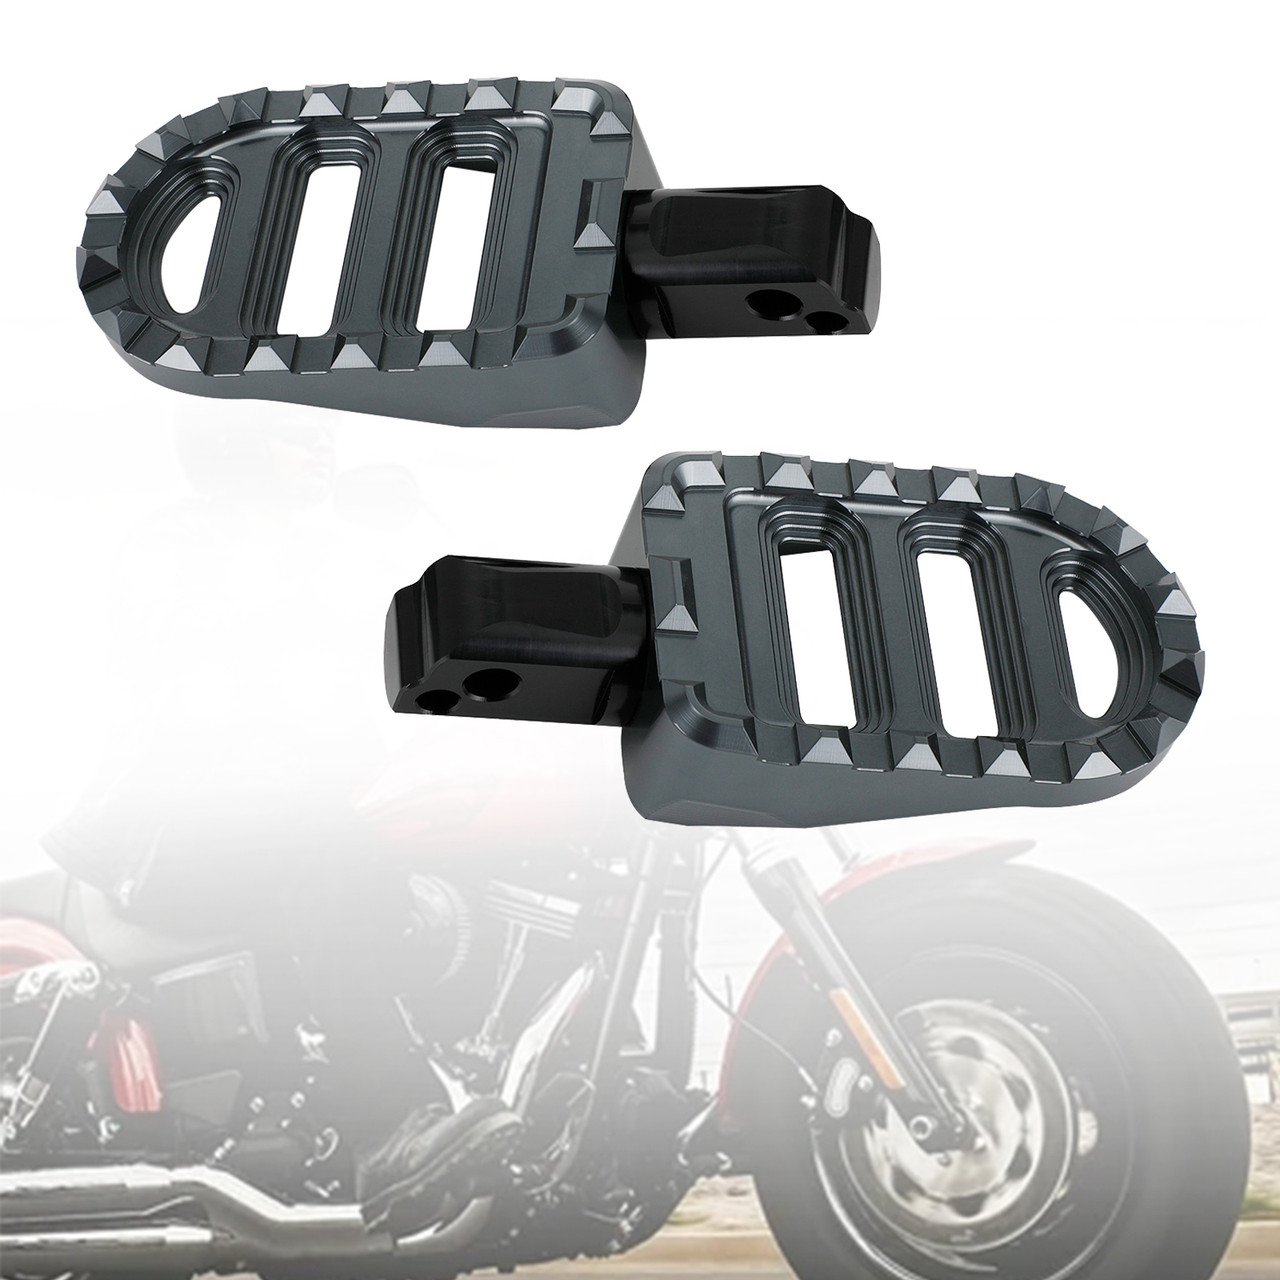 Rear Footrests Foot Peg fit for Sportster S Breakout Lower Rider Softail Slim TI